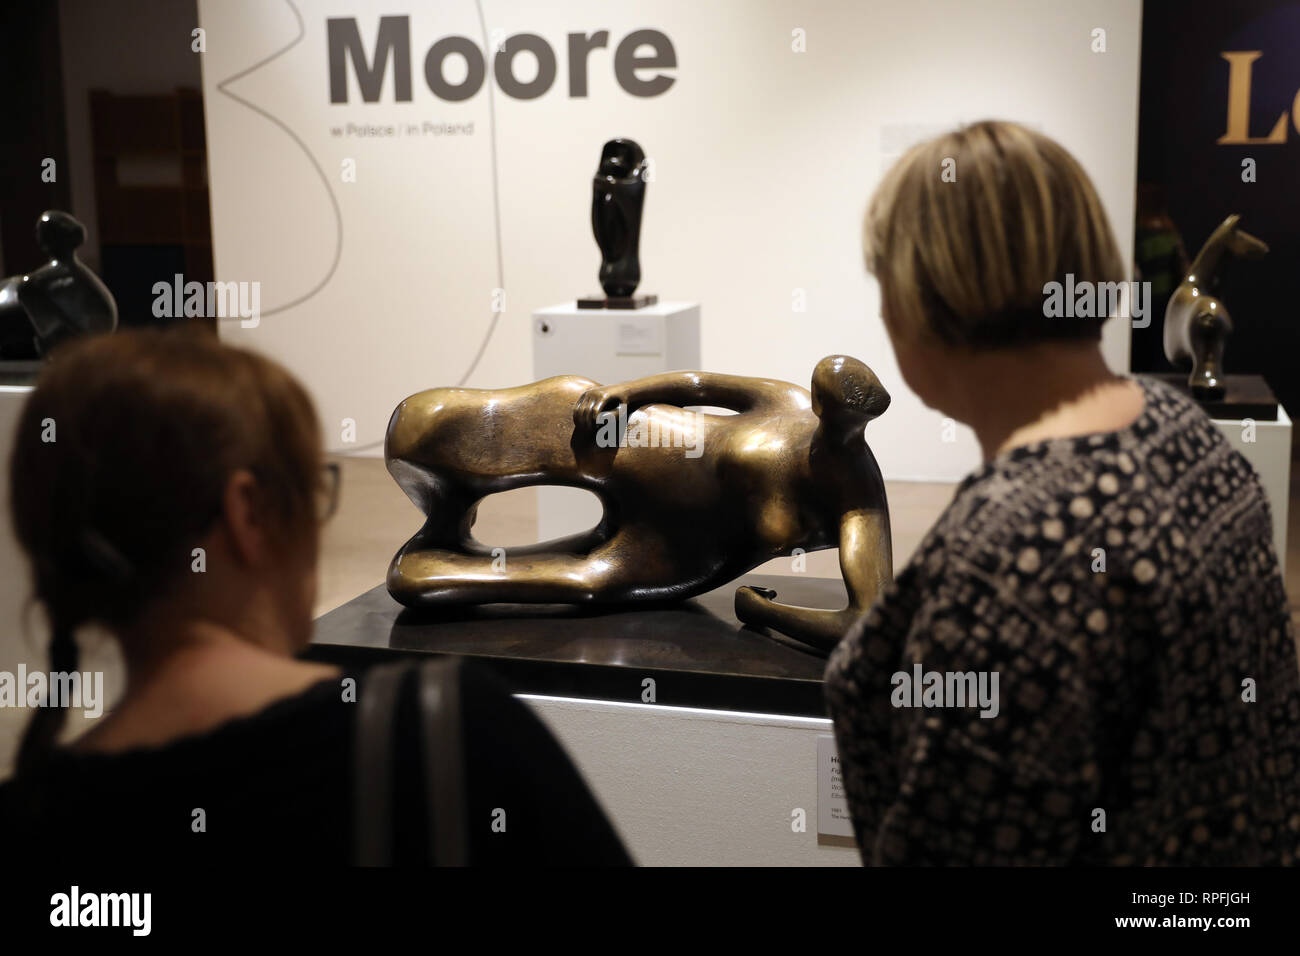 Krakow, Poland. 21st Feb, 2019. Exhibition of Henry Moore's sculptures on February 22, 2019 at National Museum in Krakow, Poland. Credit: East News sp. z o.o./Alamy Live News Stock Photo